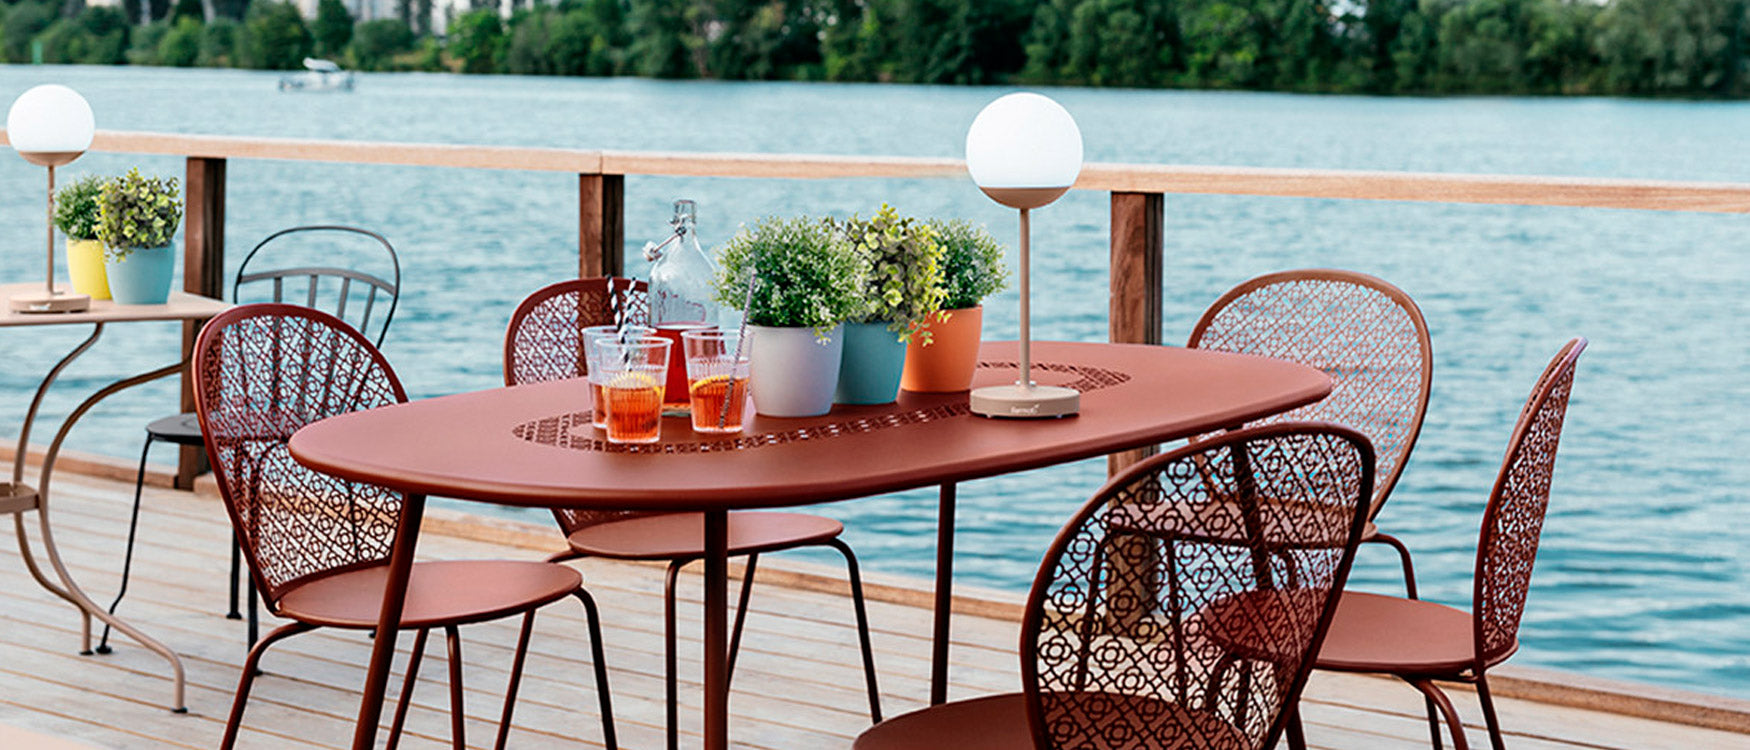 A Fermob bistro table and chairs on a deck overlooking the water